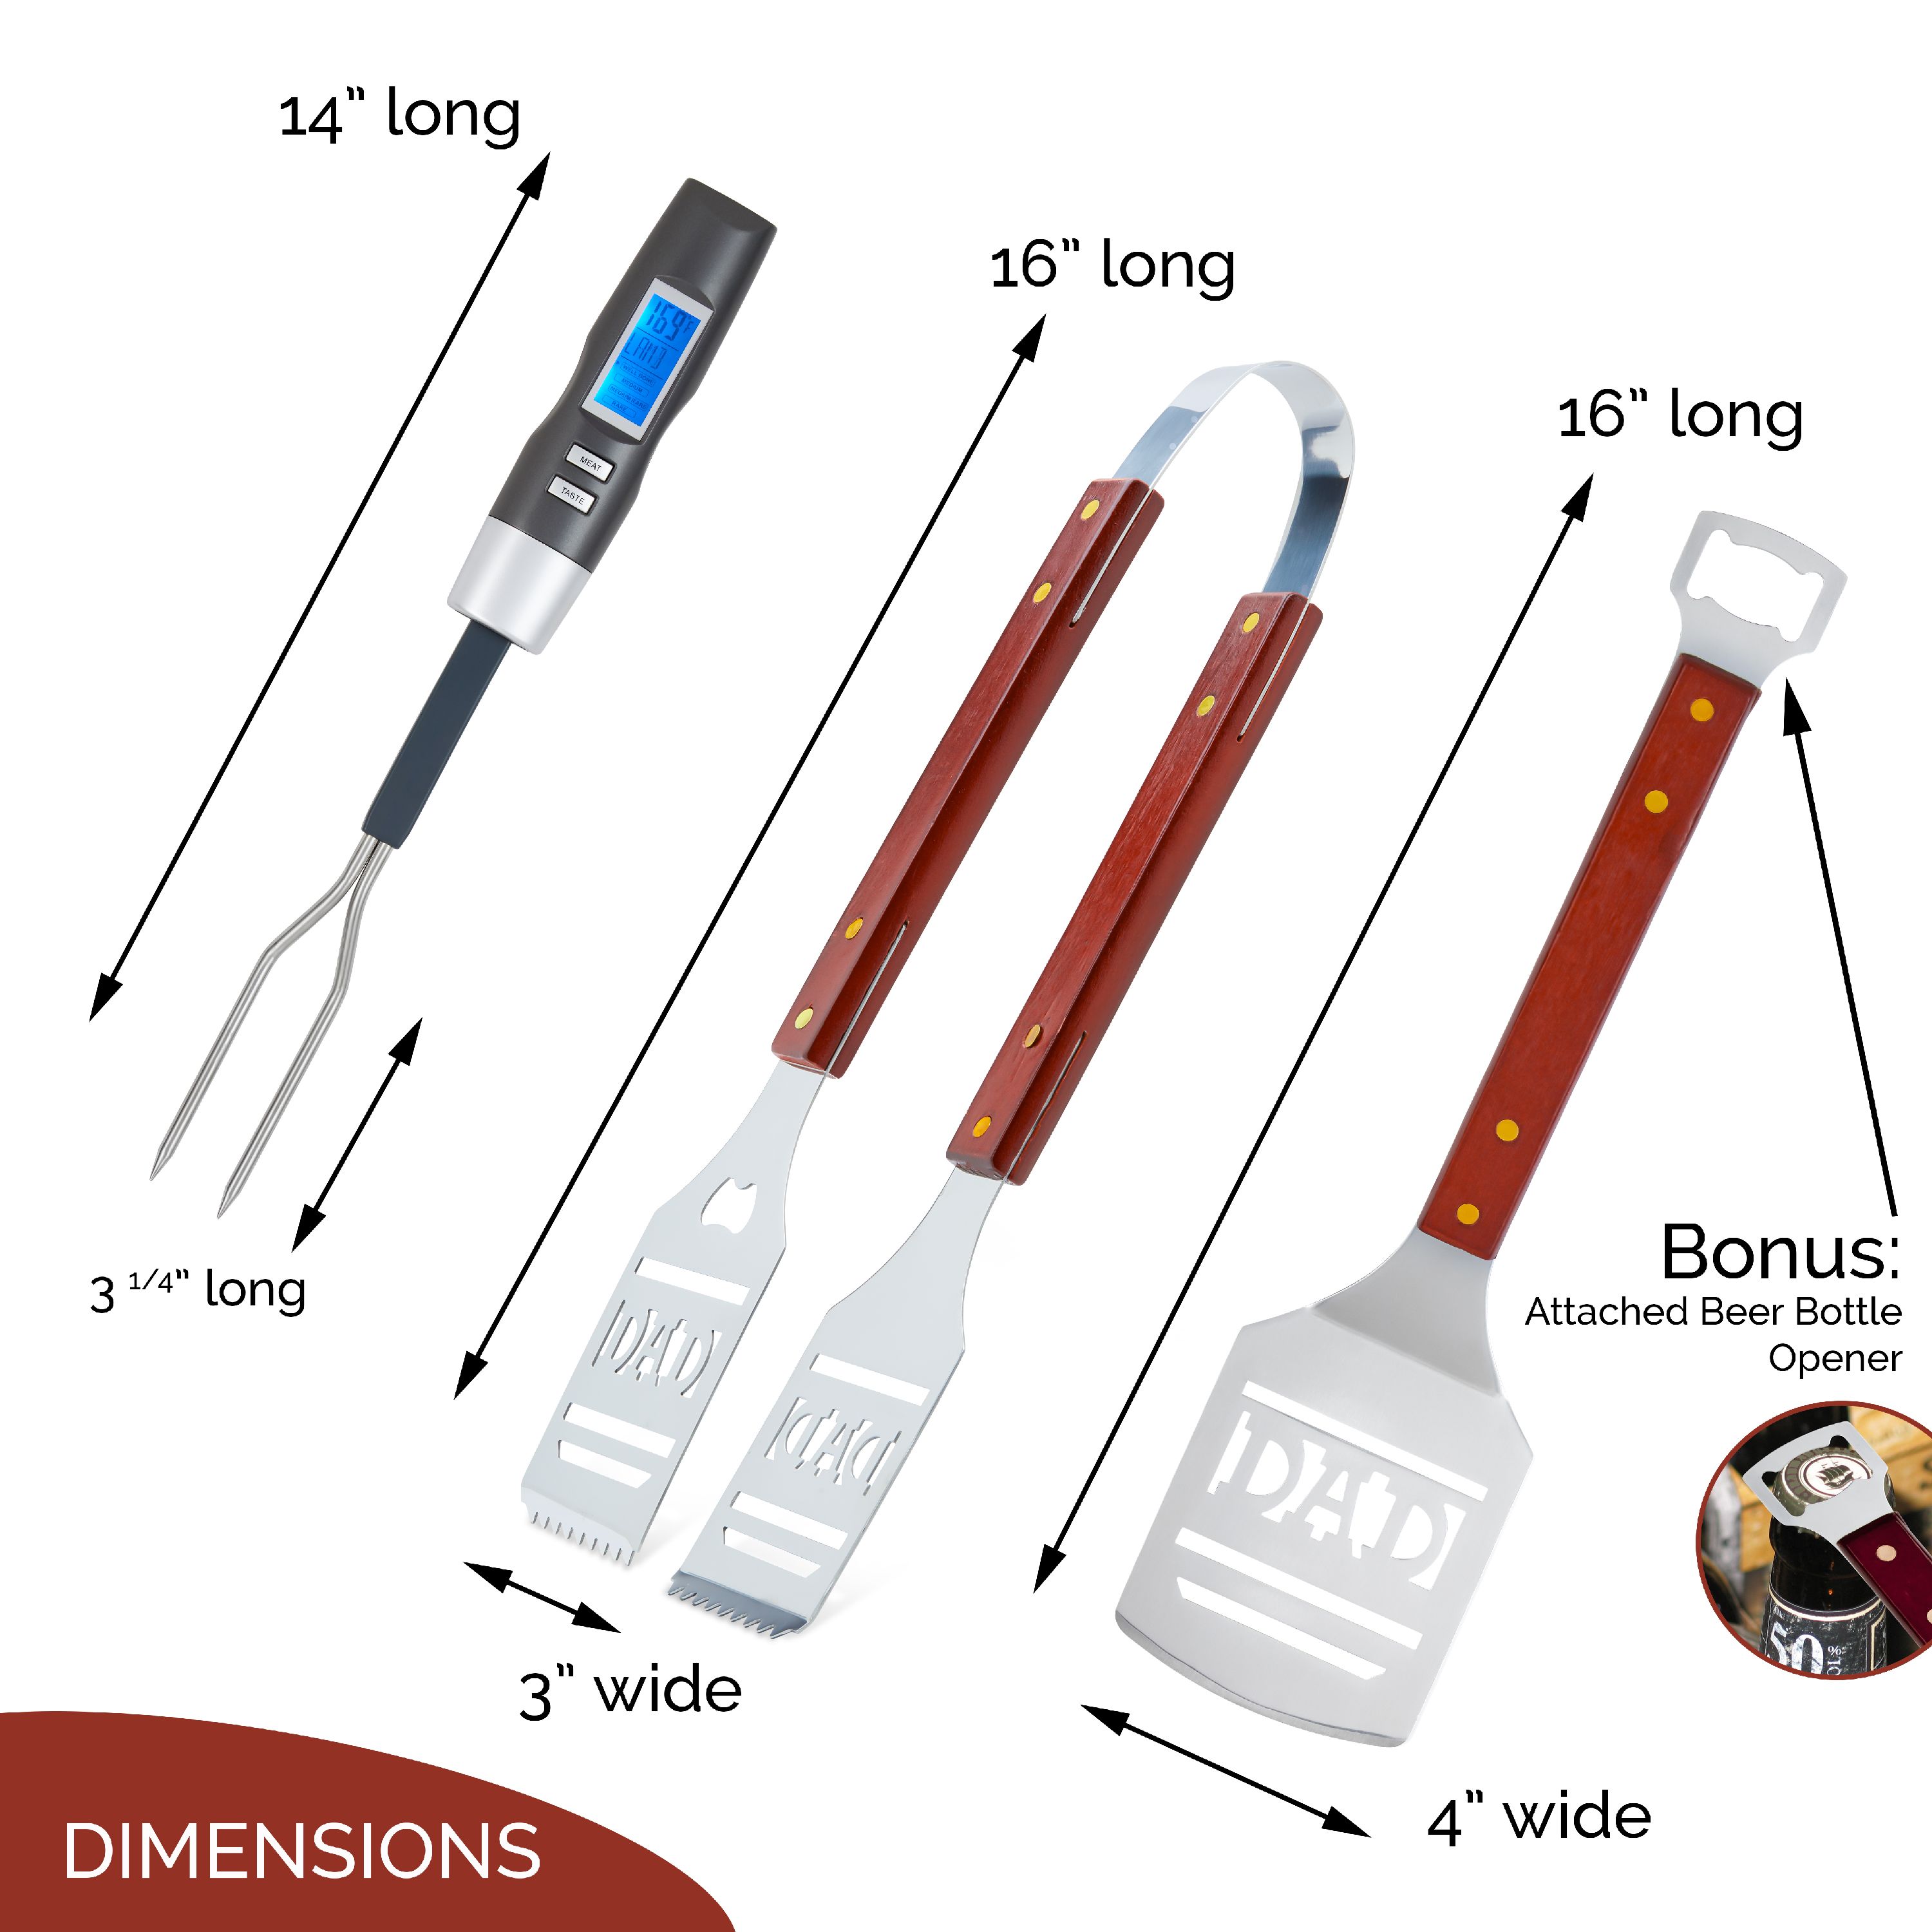 Dad BBQ Grill Set with Carry Case - 4-Piece Includes Spatula, Tongs, Digital Thermometer and Case - Great Gift for Father's Day, Dad's Birthday or Anytime for Dad - image 2 of 6